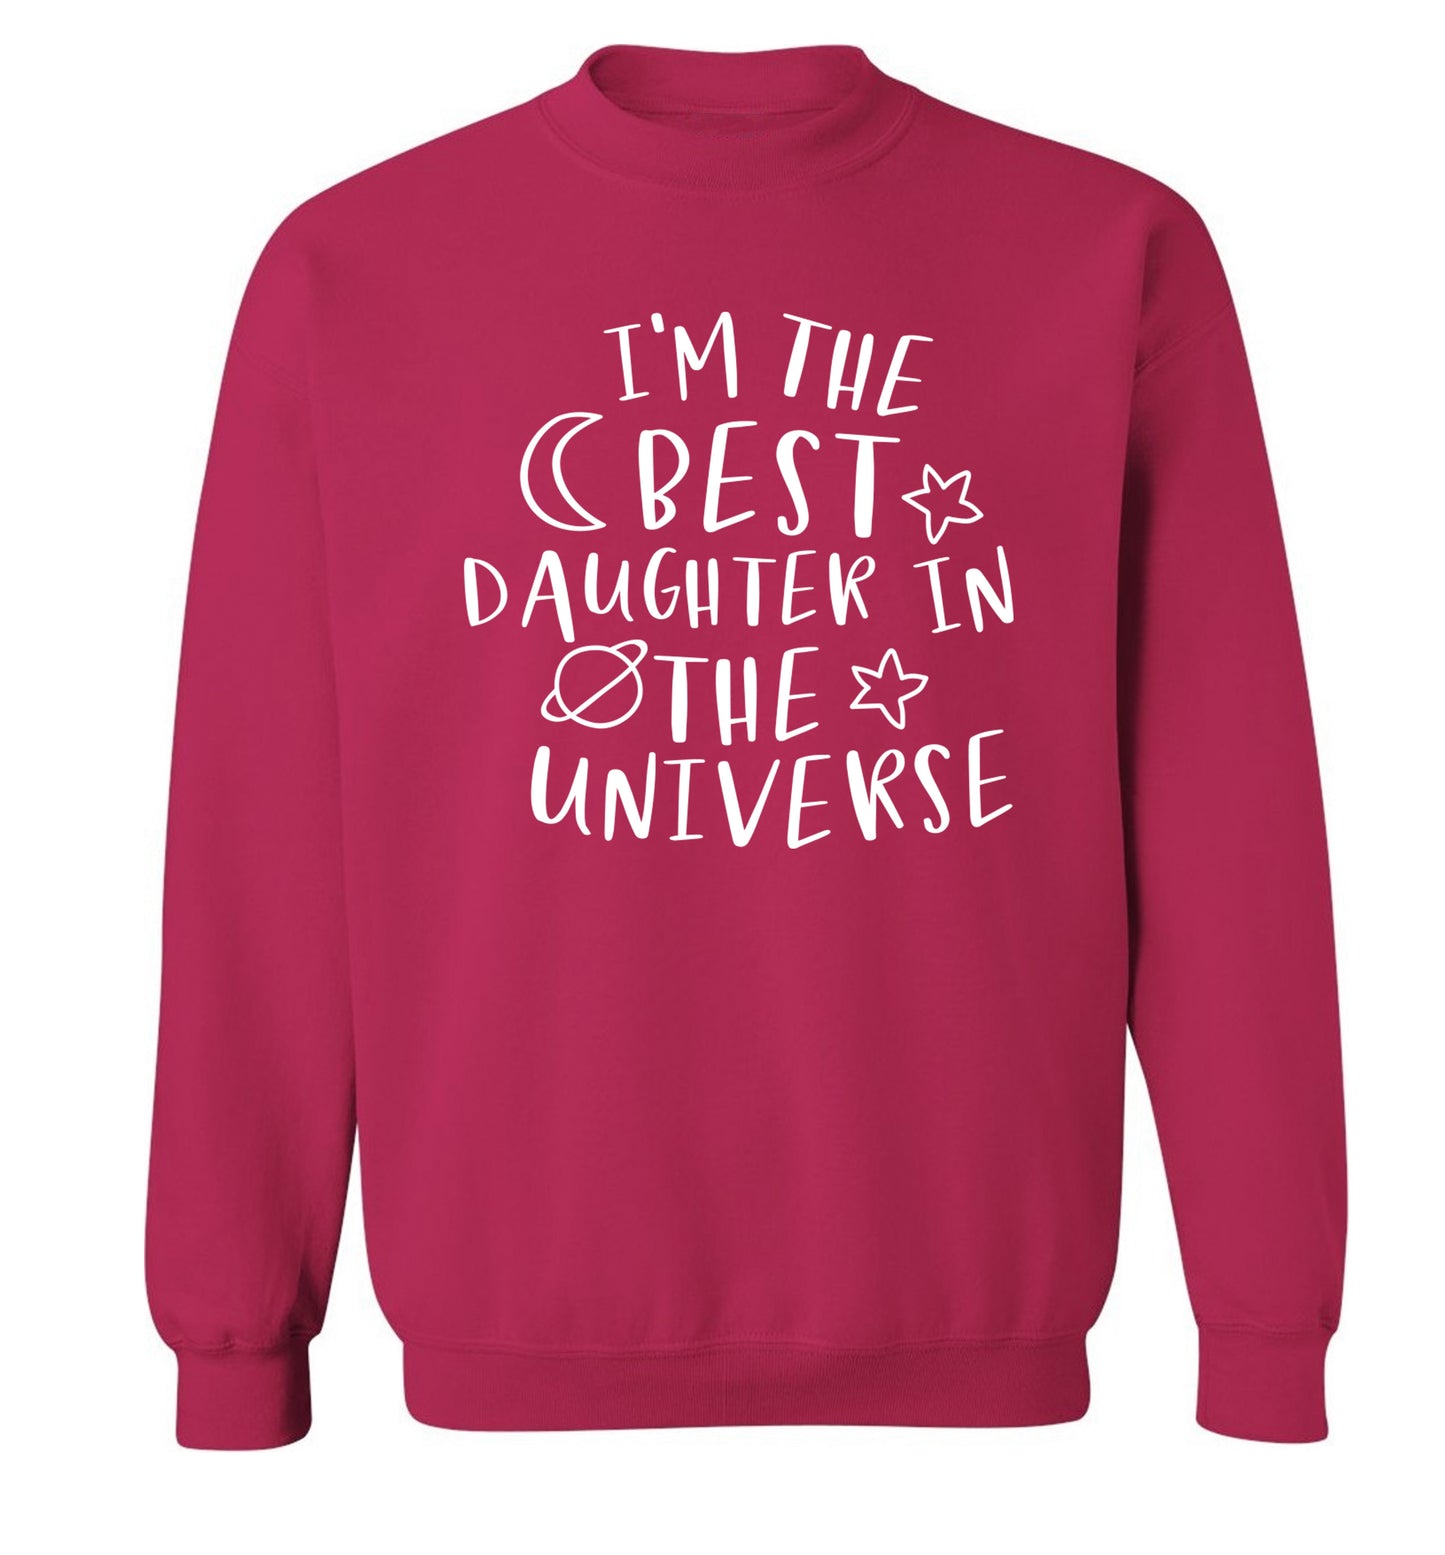 I'm the best daughter in the universe Adult's unisex pink Sweater 2XL